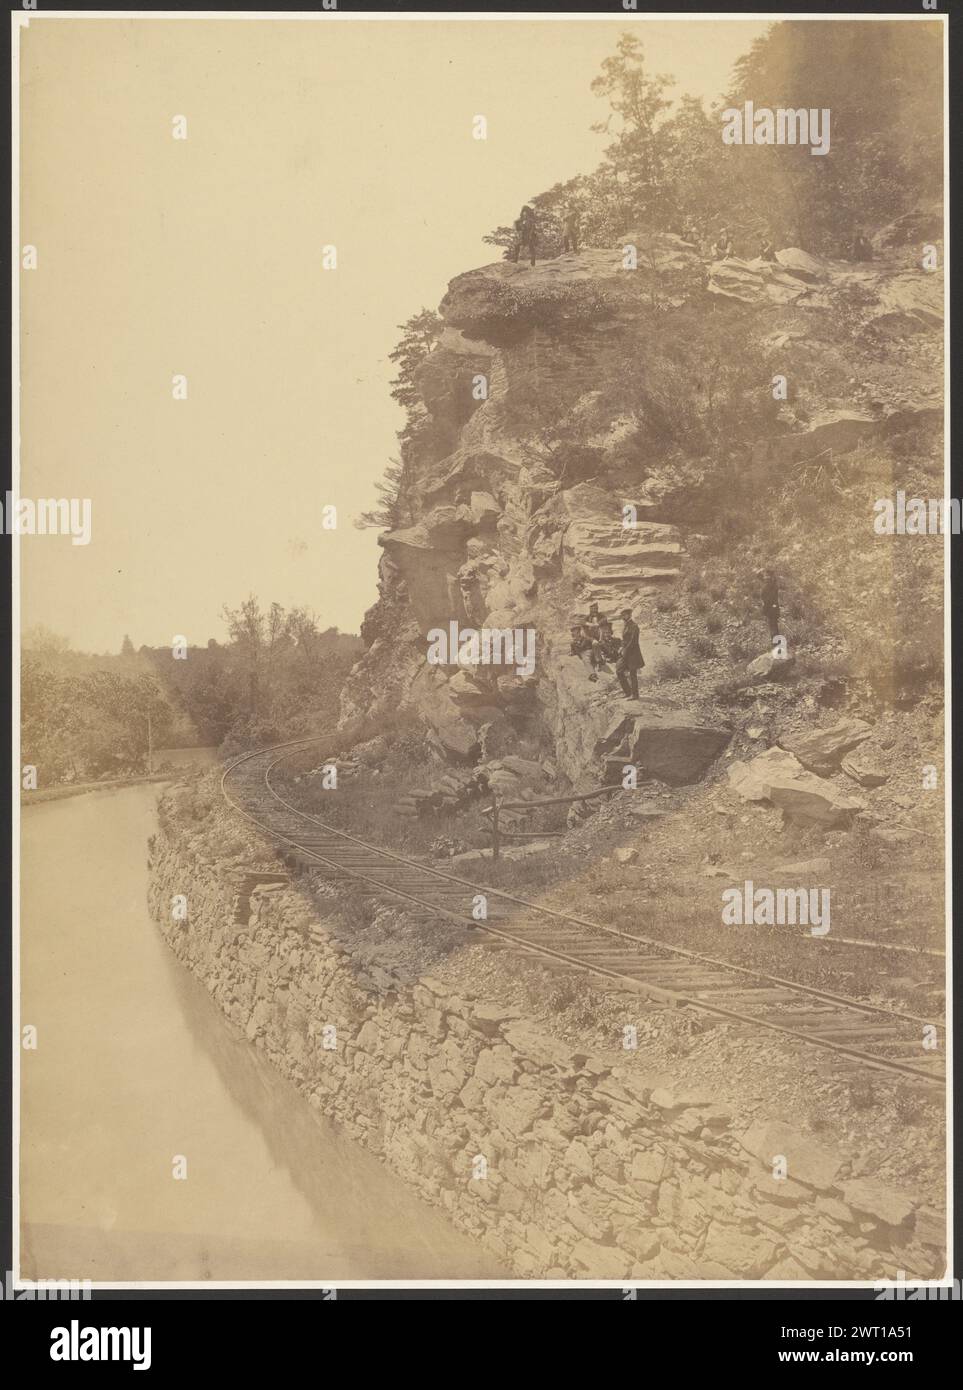 Road to Harper's Ferry. Unknown, photographer about 1860 Railroad track along a river's edge. A group of men are seated and standing on the cliffs overlooking the tracks and river. (Verso, mount) lower right, pencil: 'CW 56/CW'; Inscribed verso print in pencil, titled and 'Brady c. 1860 - 65', 'GOO y', '#119 Chocolate'. (Print remounted, inscriptions visible before remounting). Inscribed verso old mat in pencil 'Brady CW Repair B&O RR/1861 - 65' and '#94/1 of 7'. Stock Photo